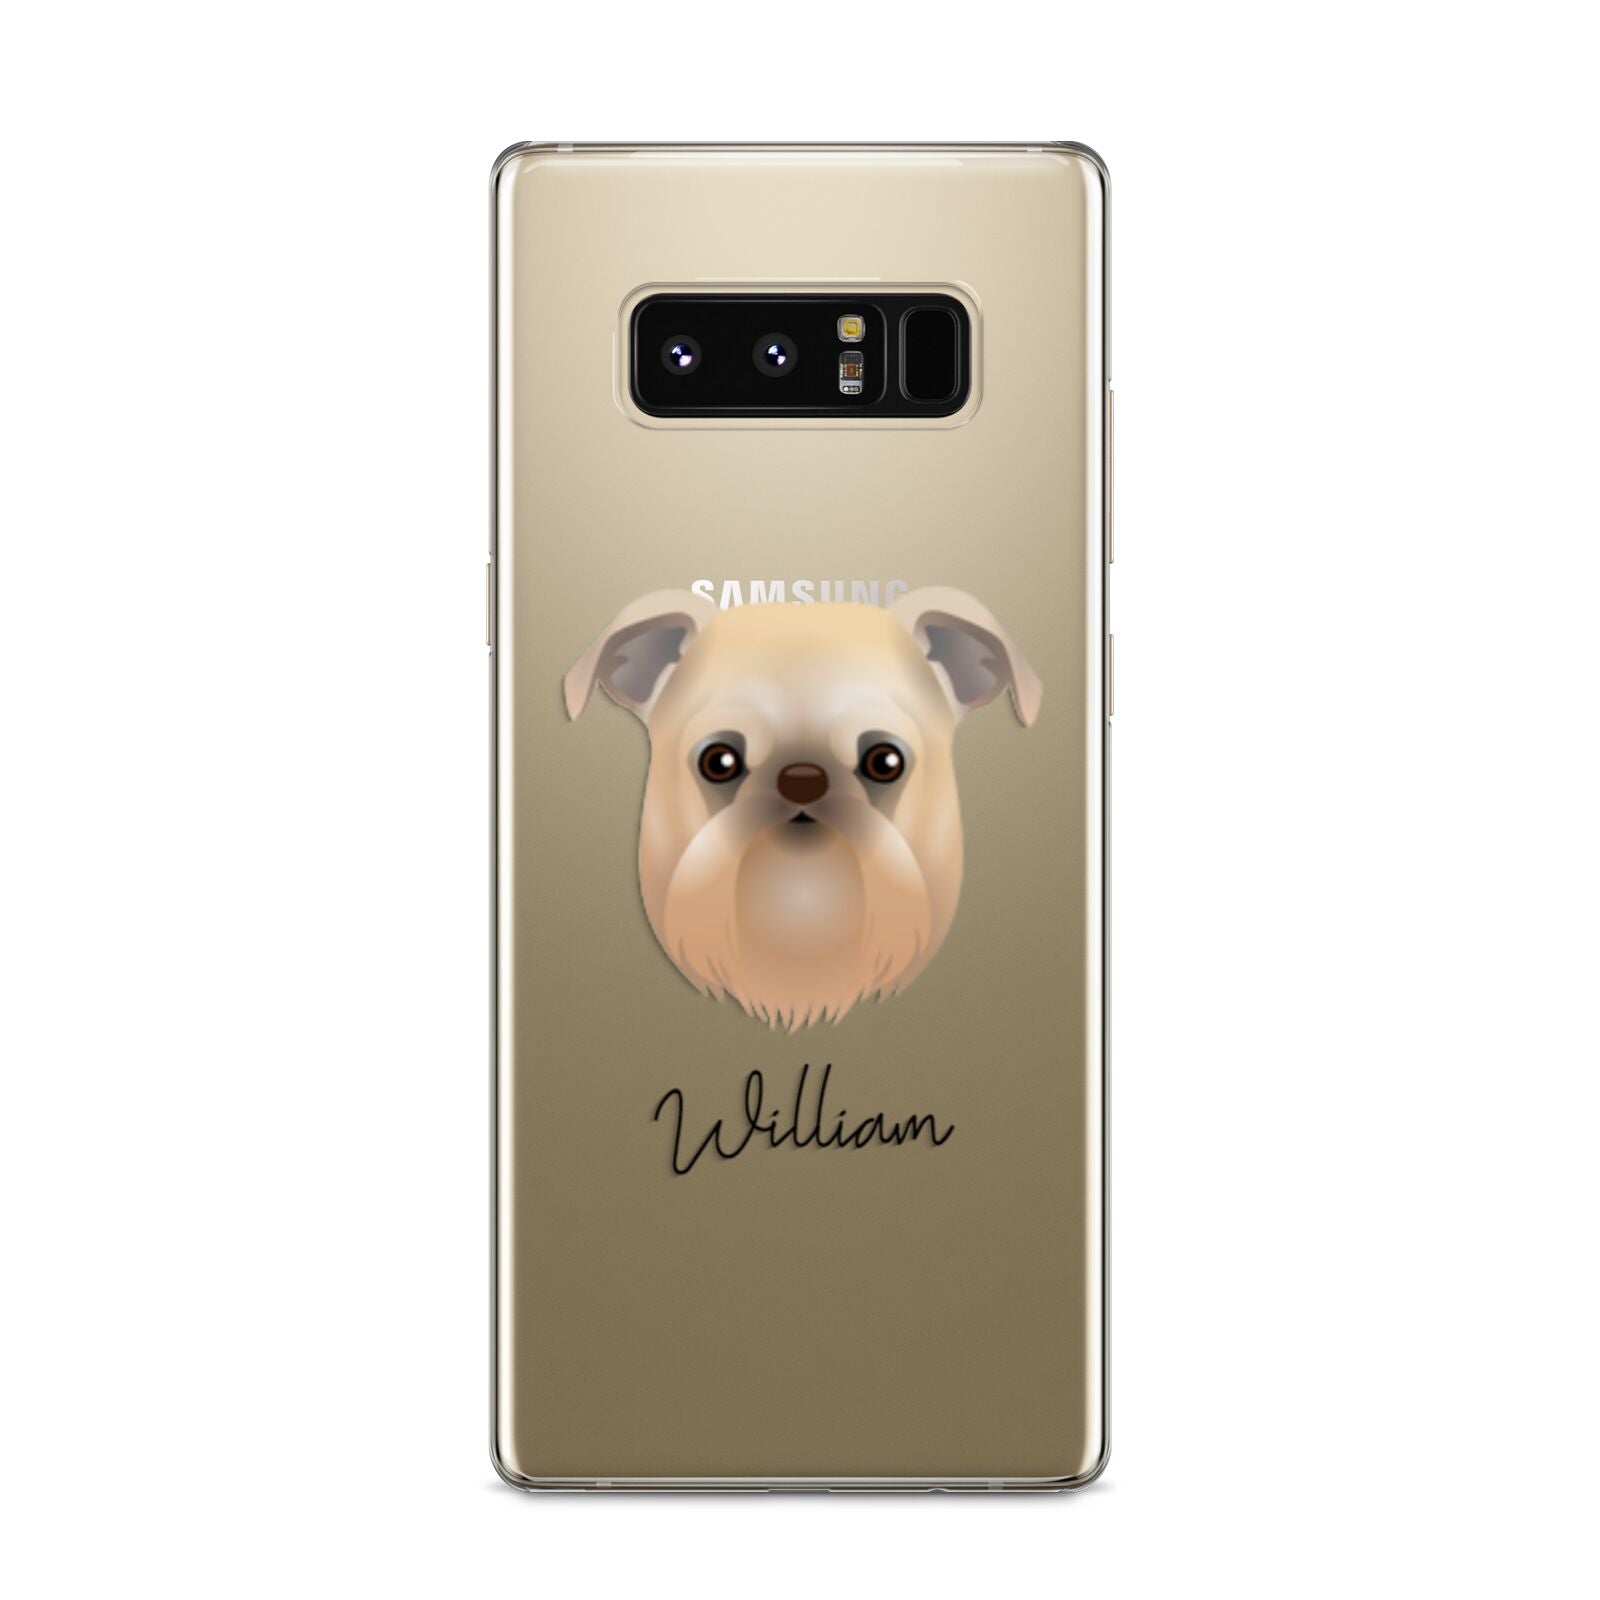 Griffon Bruxellois Personalised Samsung Galaxy S8 Case